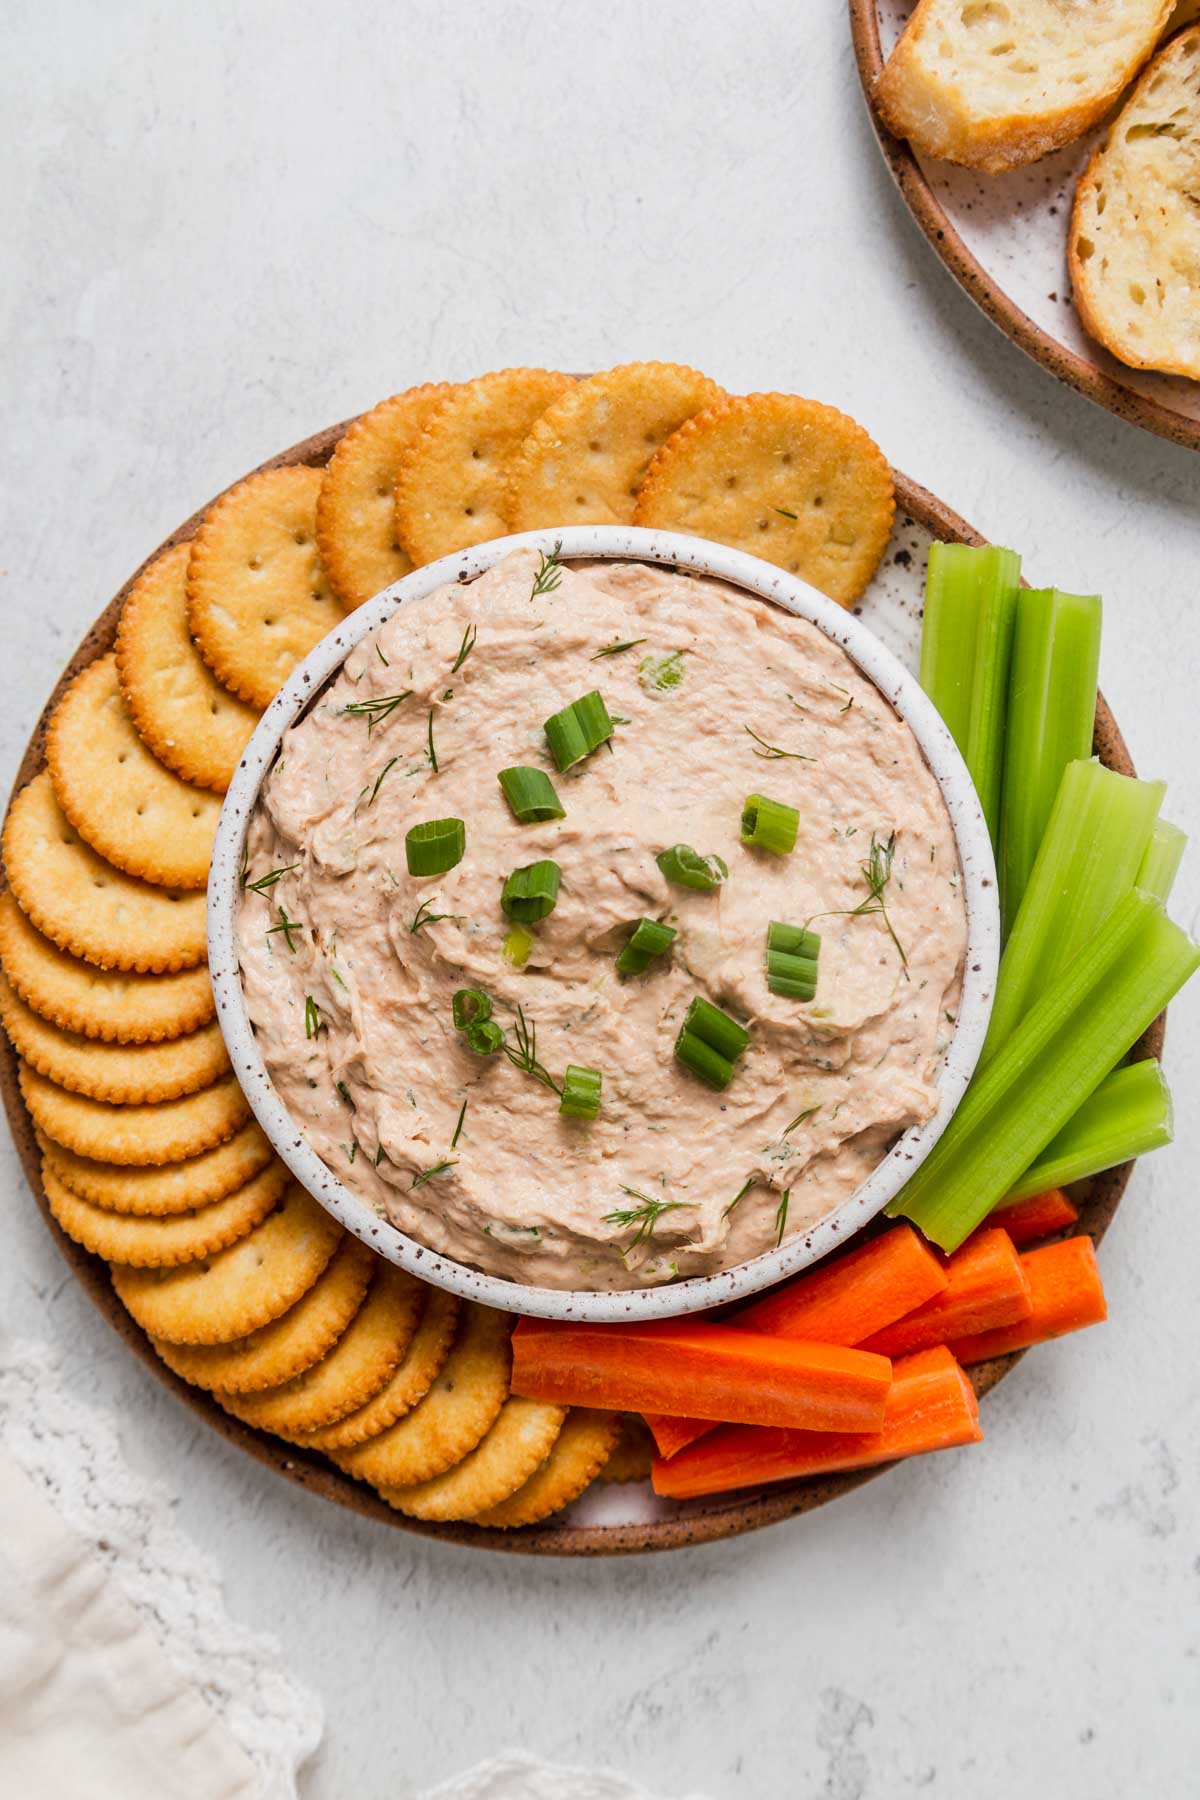 easy tuna dip recipe with crackers and vegetables.